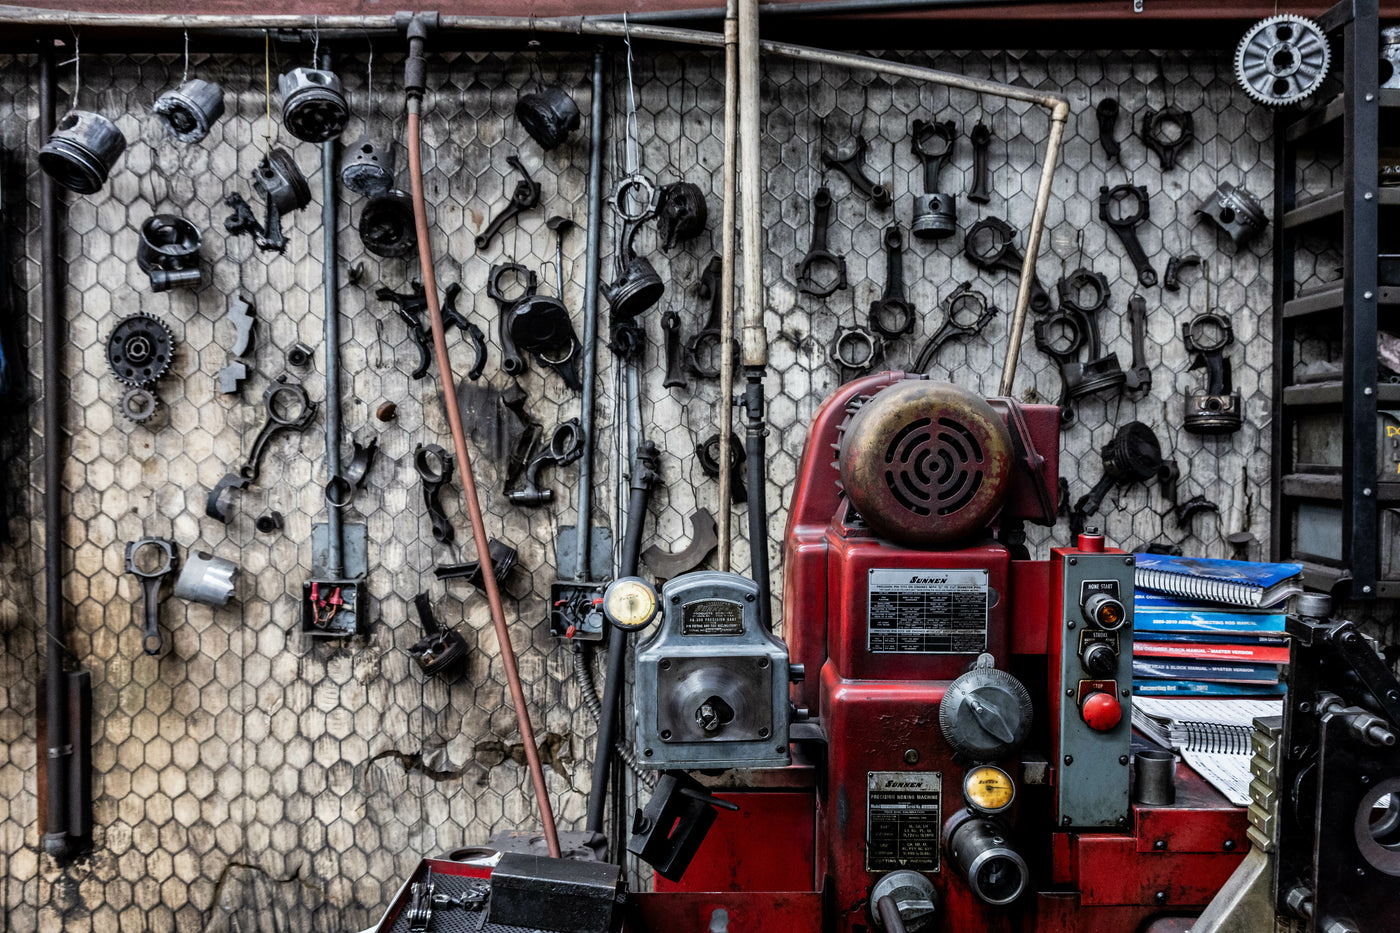 Machine Repair Tools on a Wall